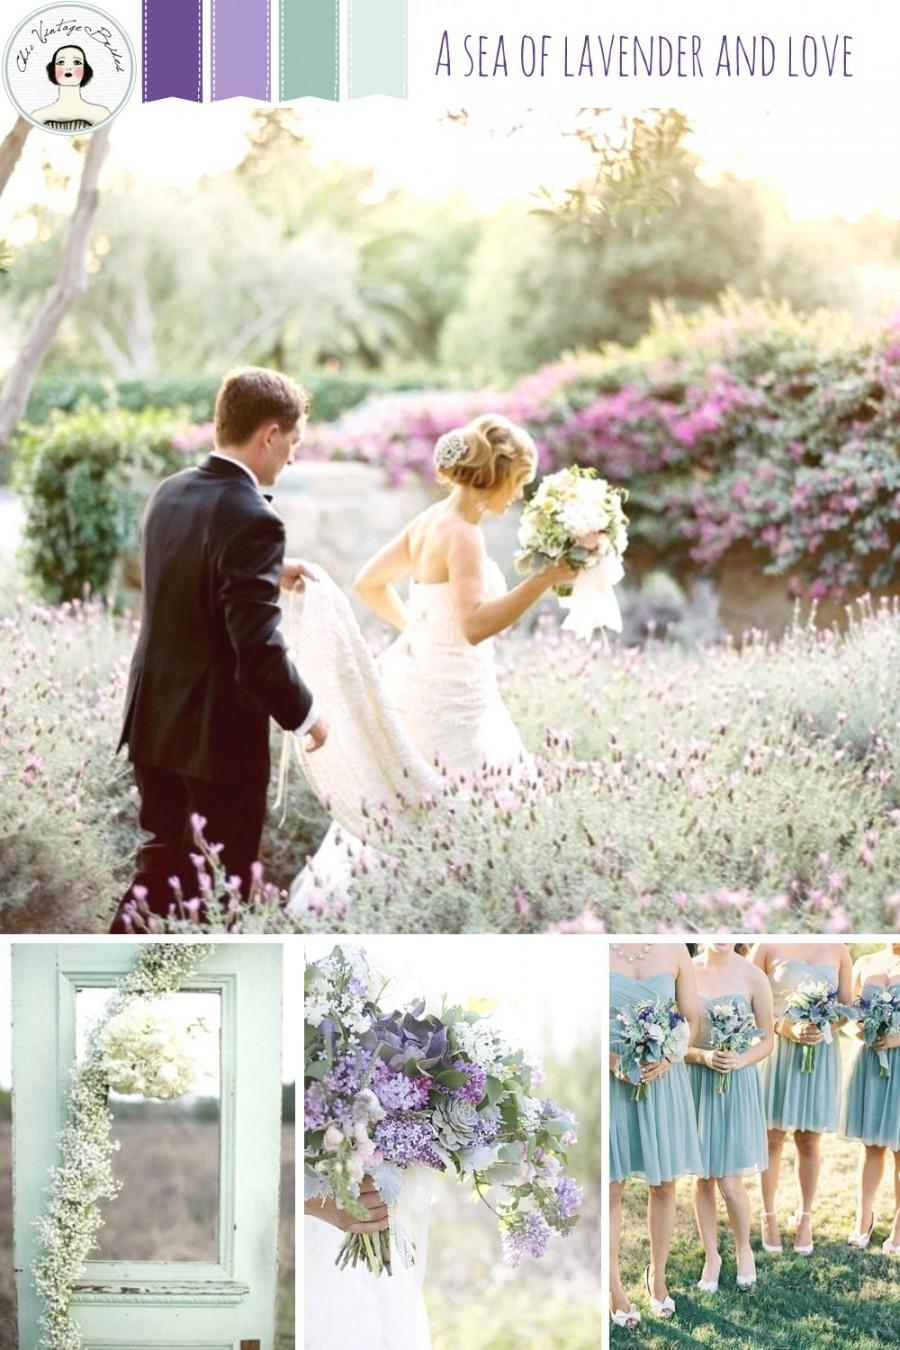 Wedding - A Sea of Lavender and Love - Romantic Wedding Inspiration in Shades of Lavender and Seafoam